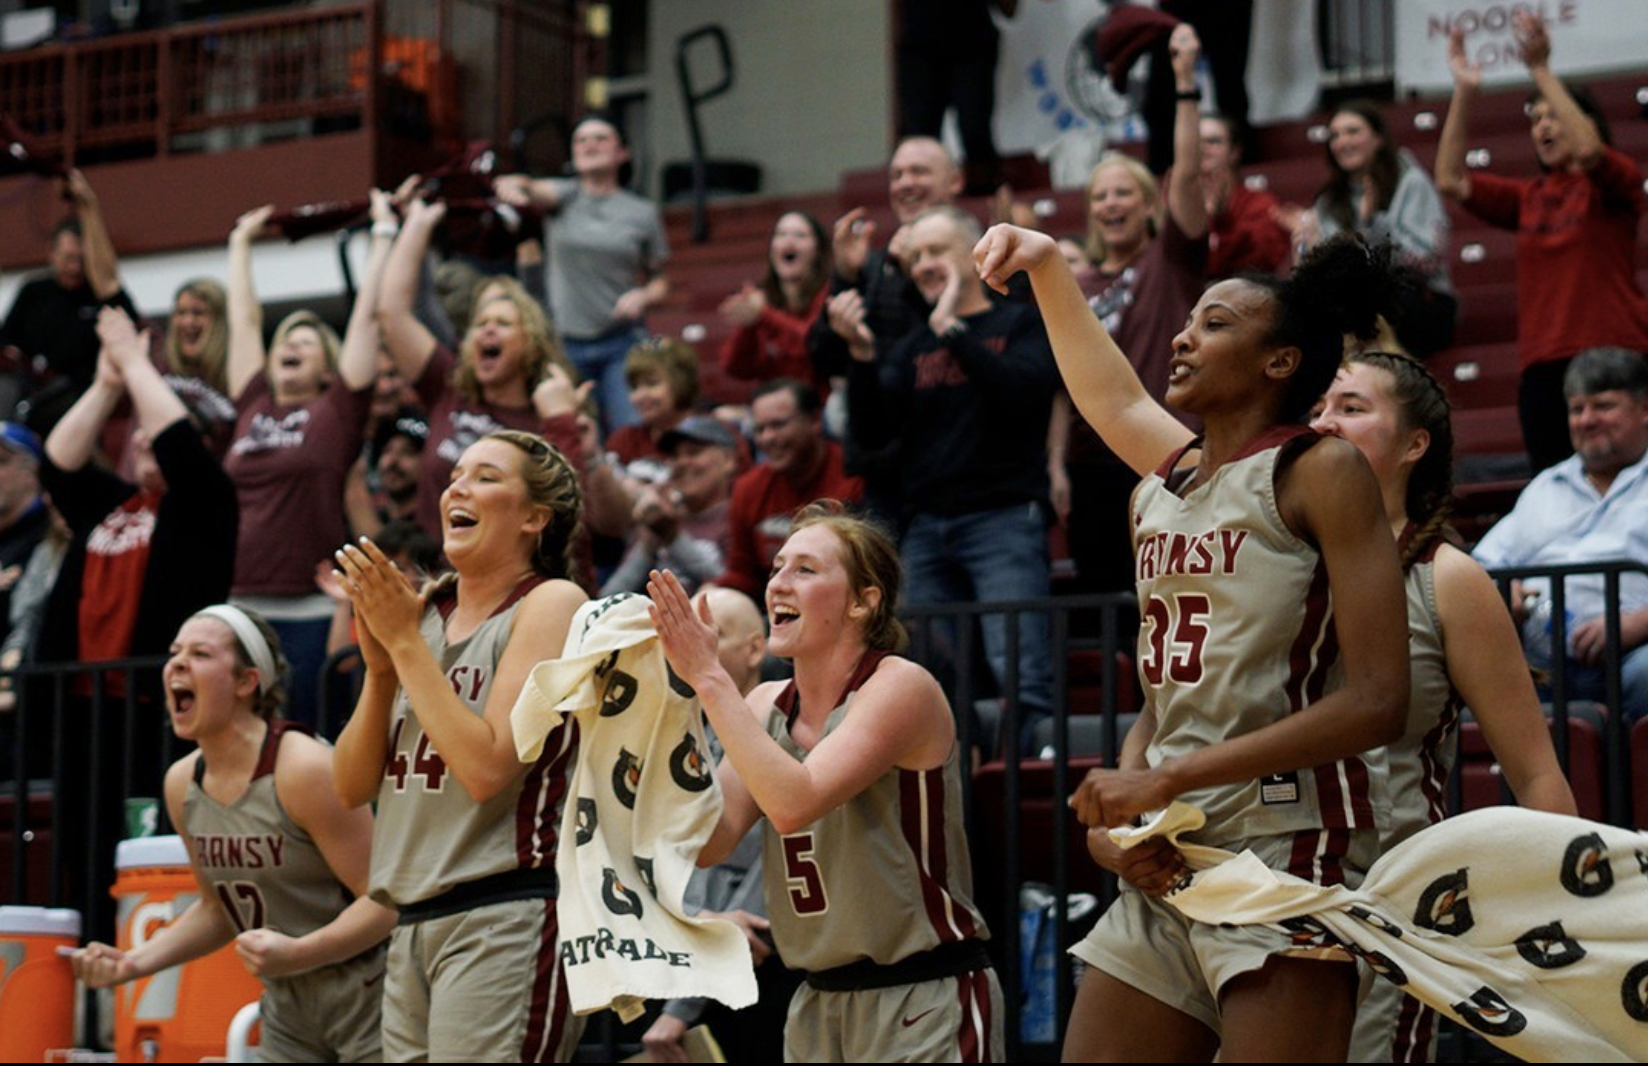 National championship in the (note)cards for Transylvania women’s basketball team